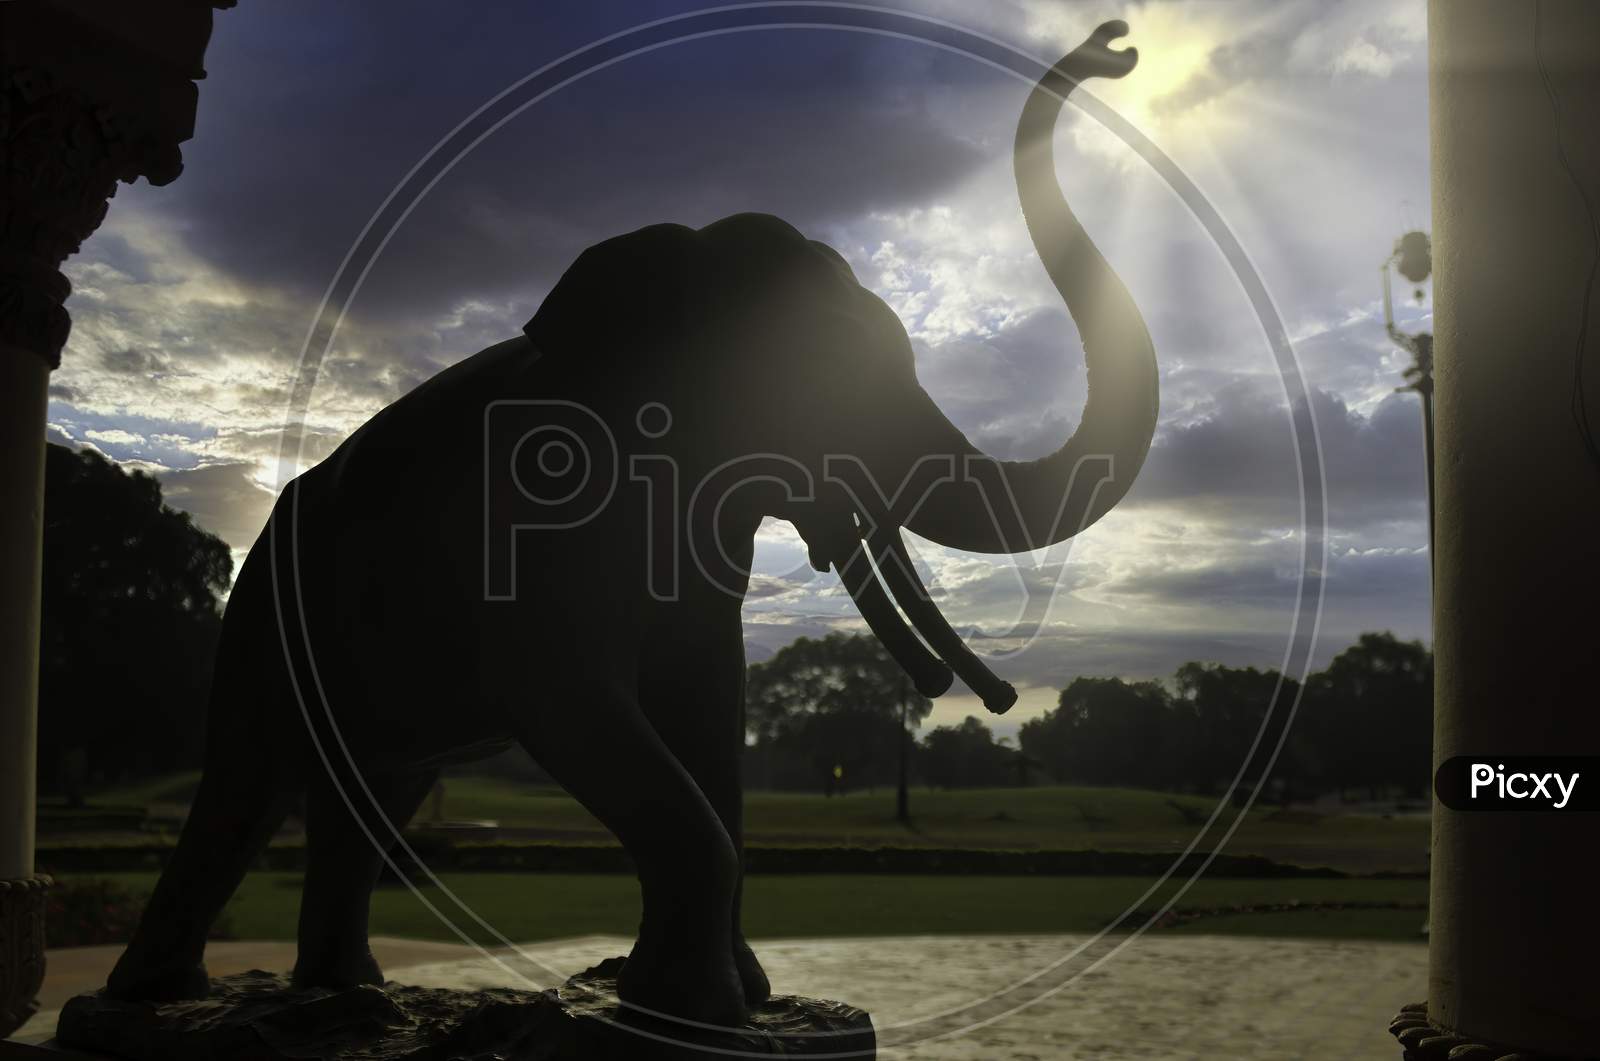 Vadodara, India - November 16, 2012: An Elephant Stone Monument Situated In The Lakshmi Vilas Palace In The State Of Gujarat Against Dramatic Sunset